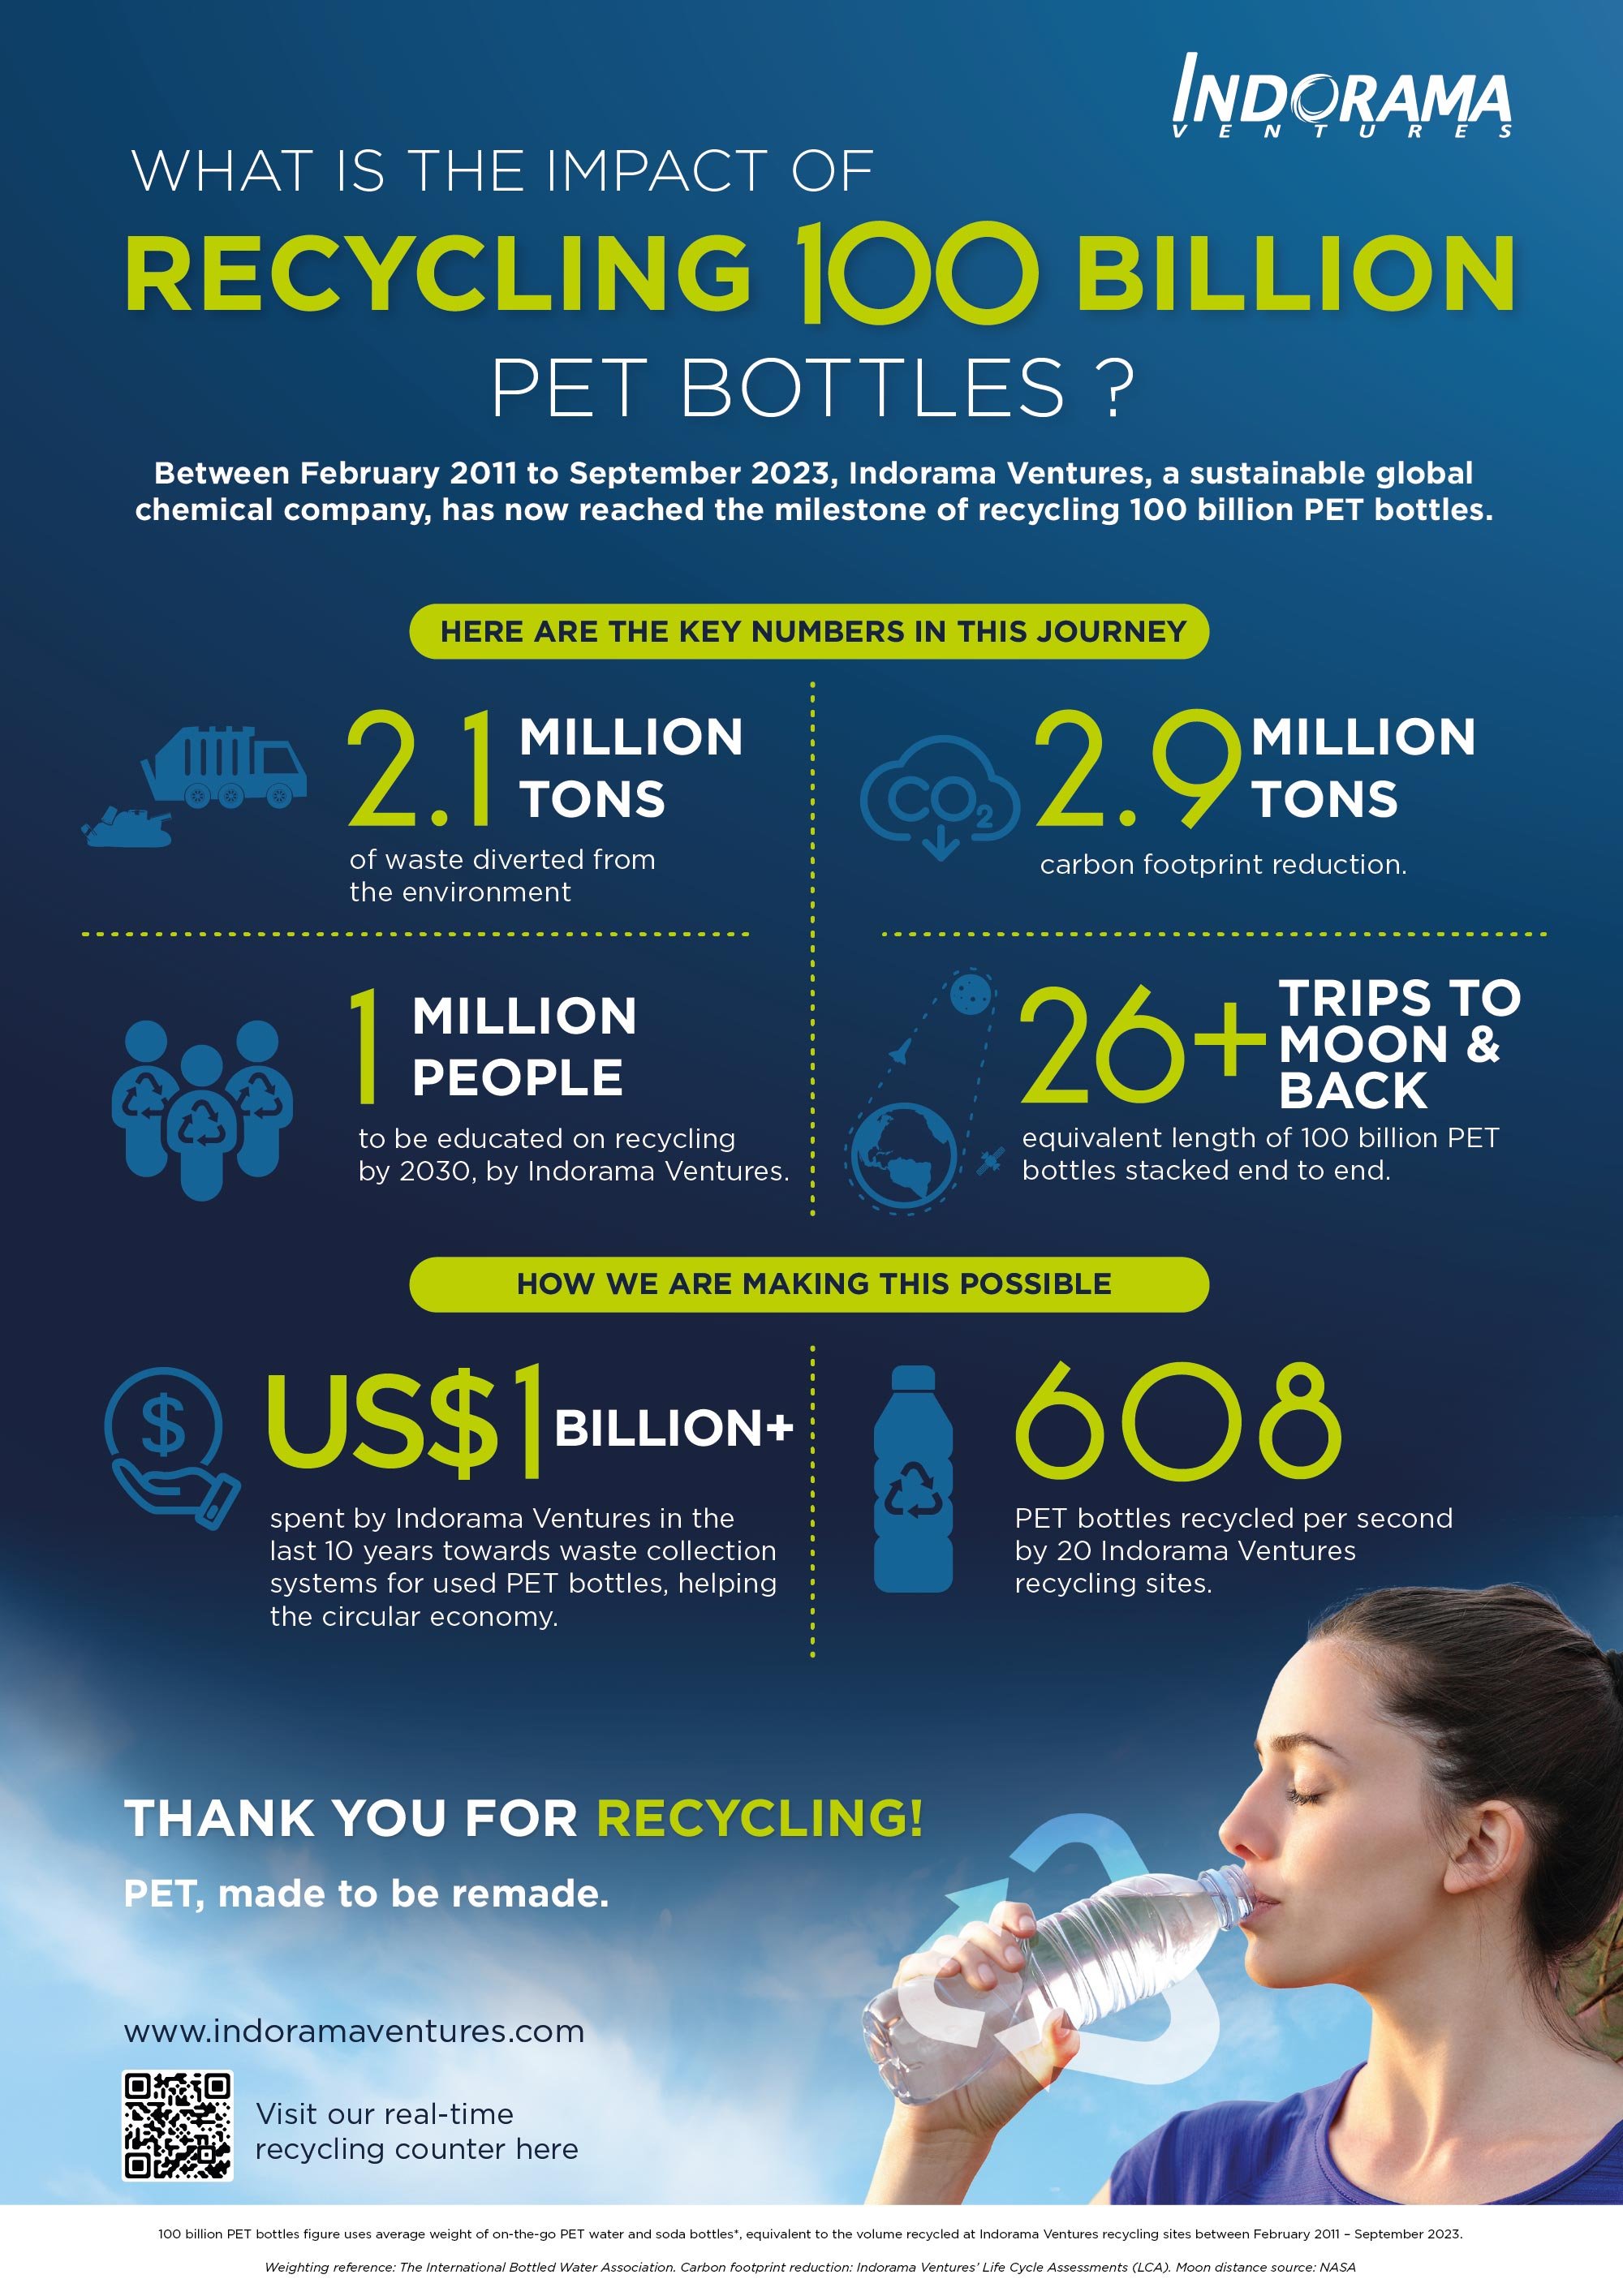 https://sustainability.indoramaventures.com/storage/content/environmental/recycling/business/recycled-infographic.jpg